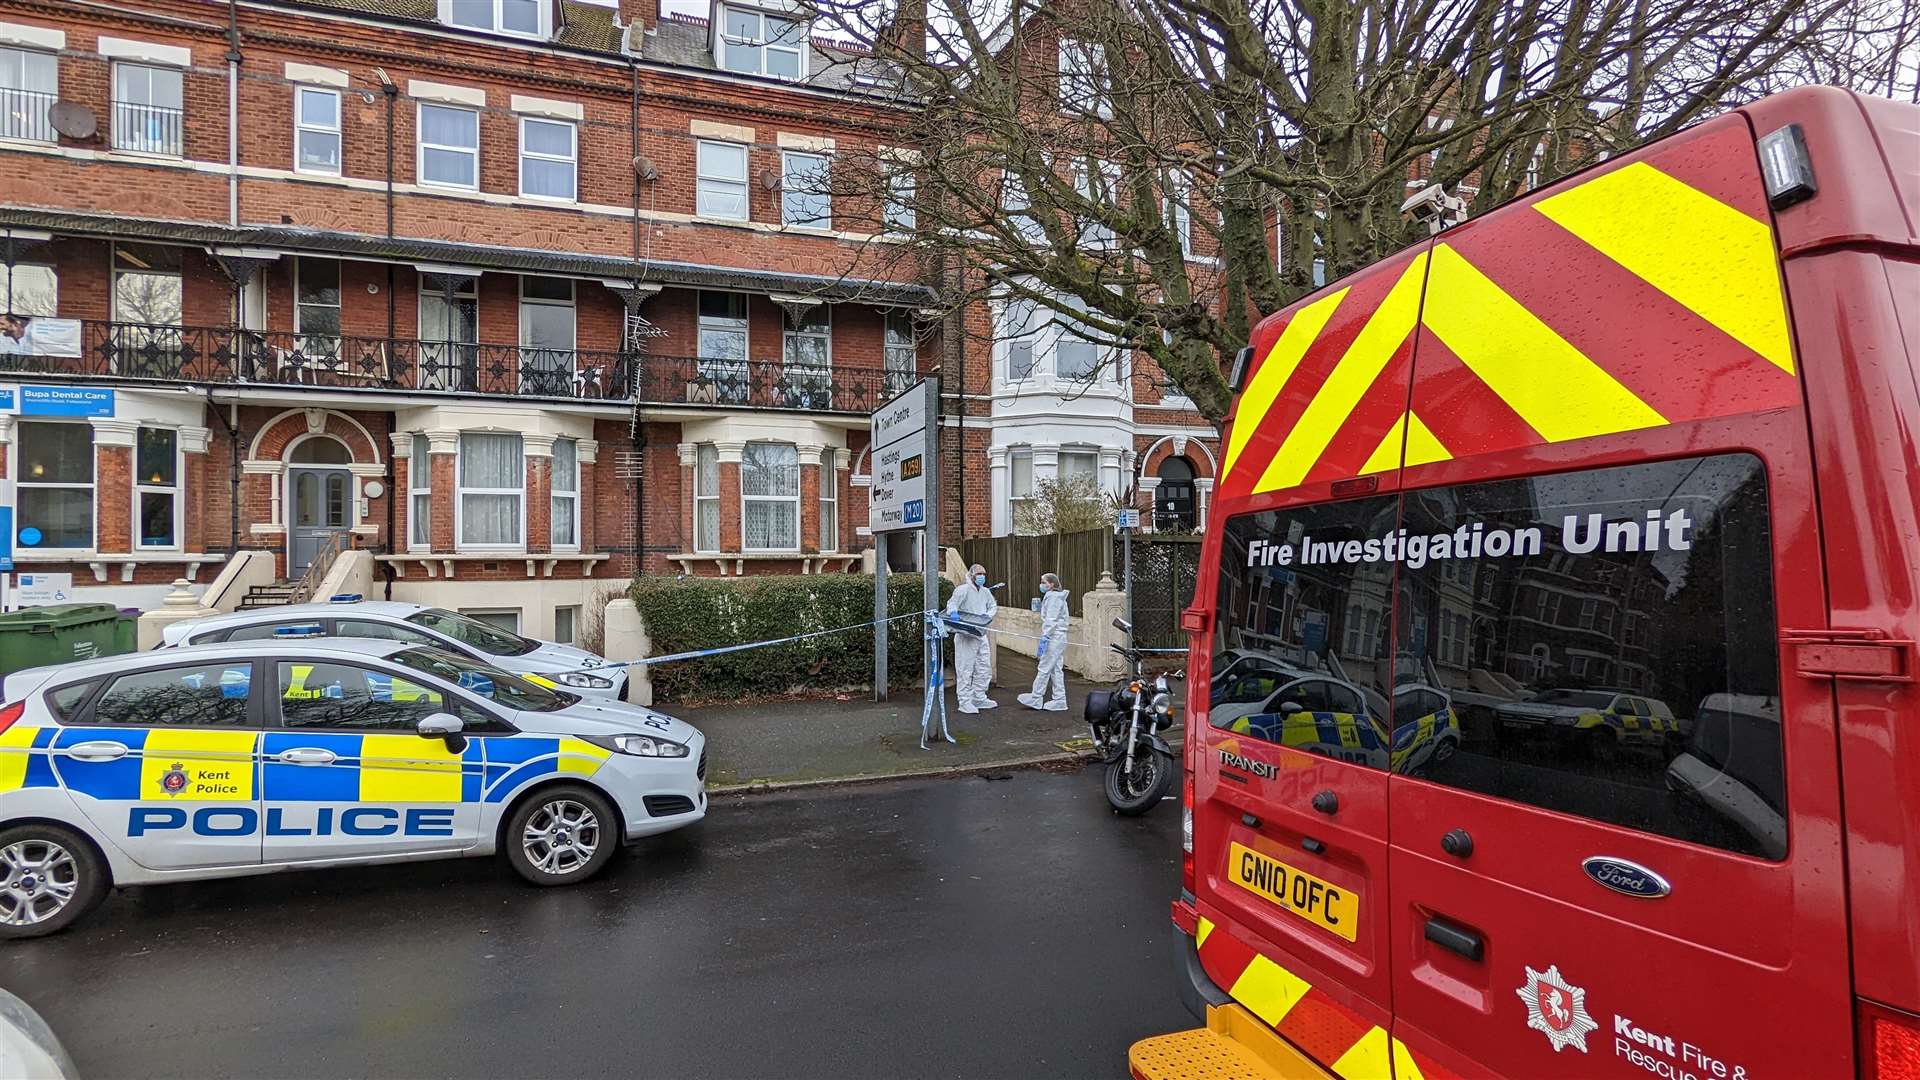 An arrest has now been made following the suspicious fire in Shorncliffe Road